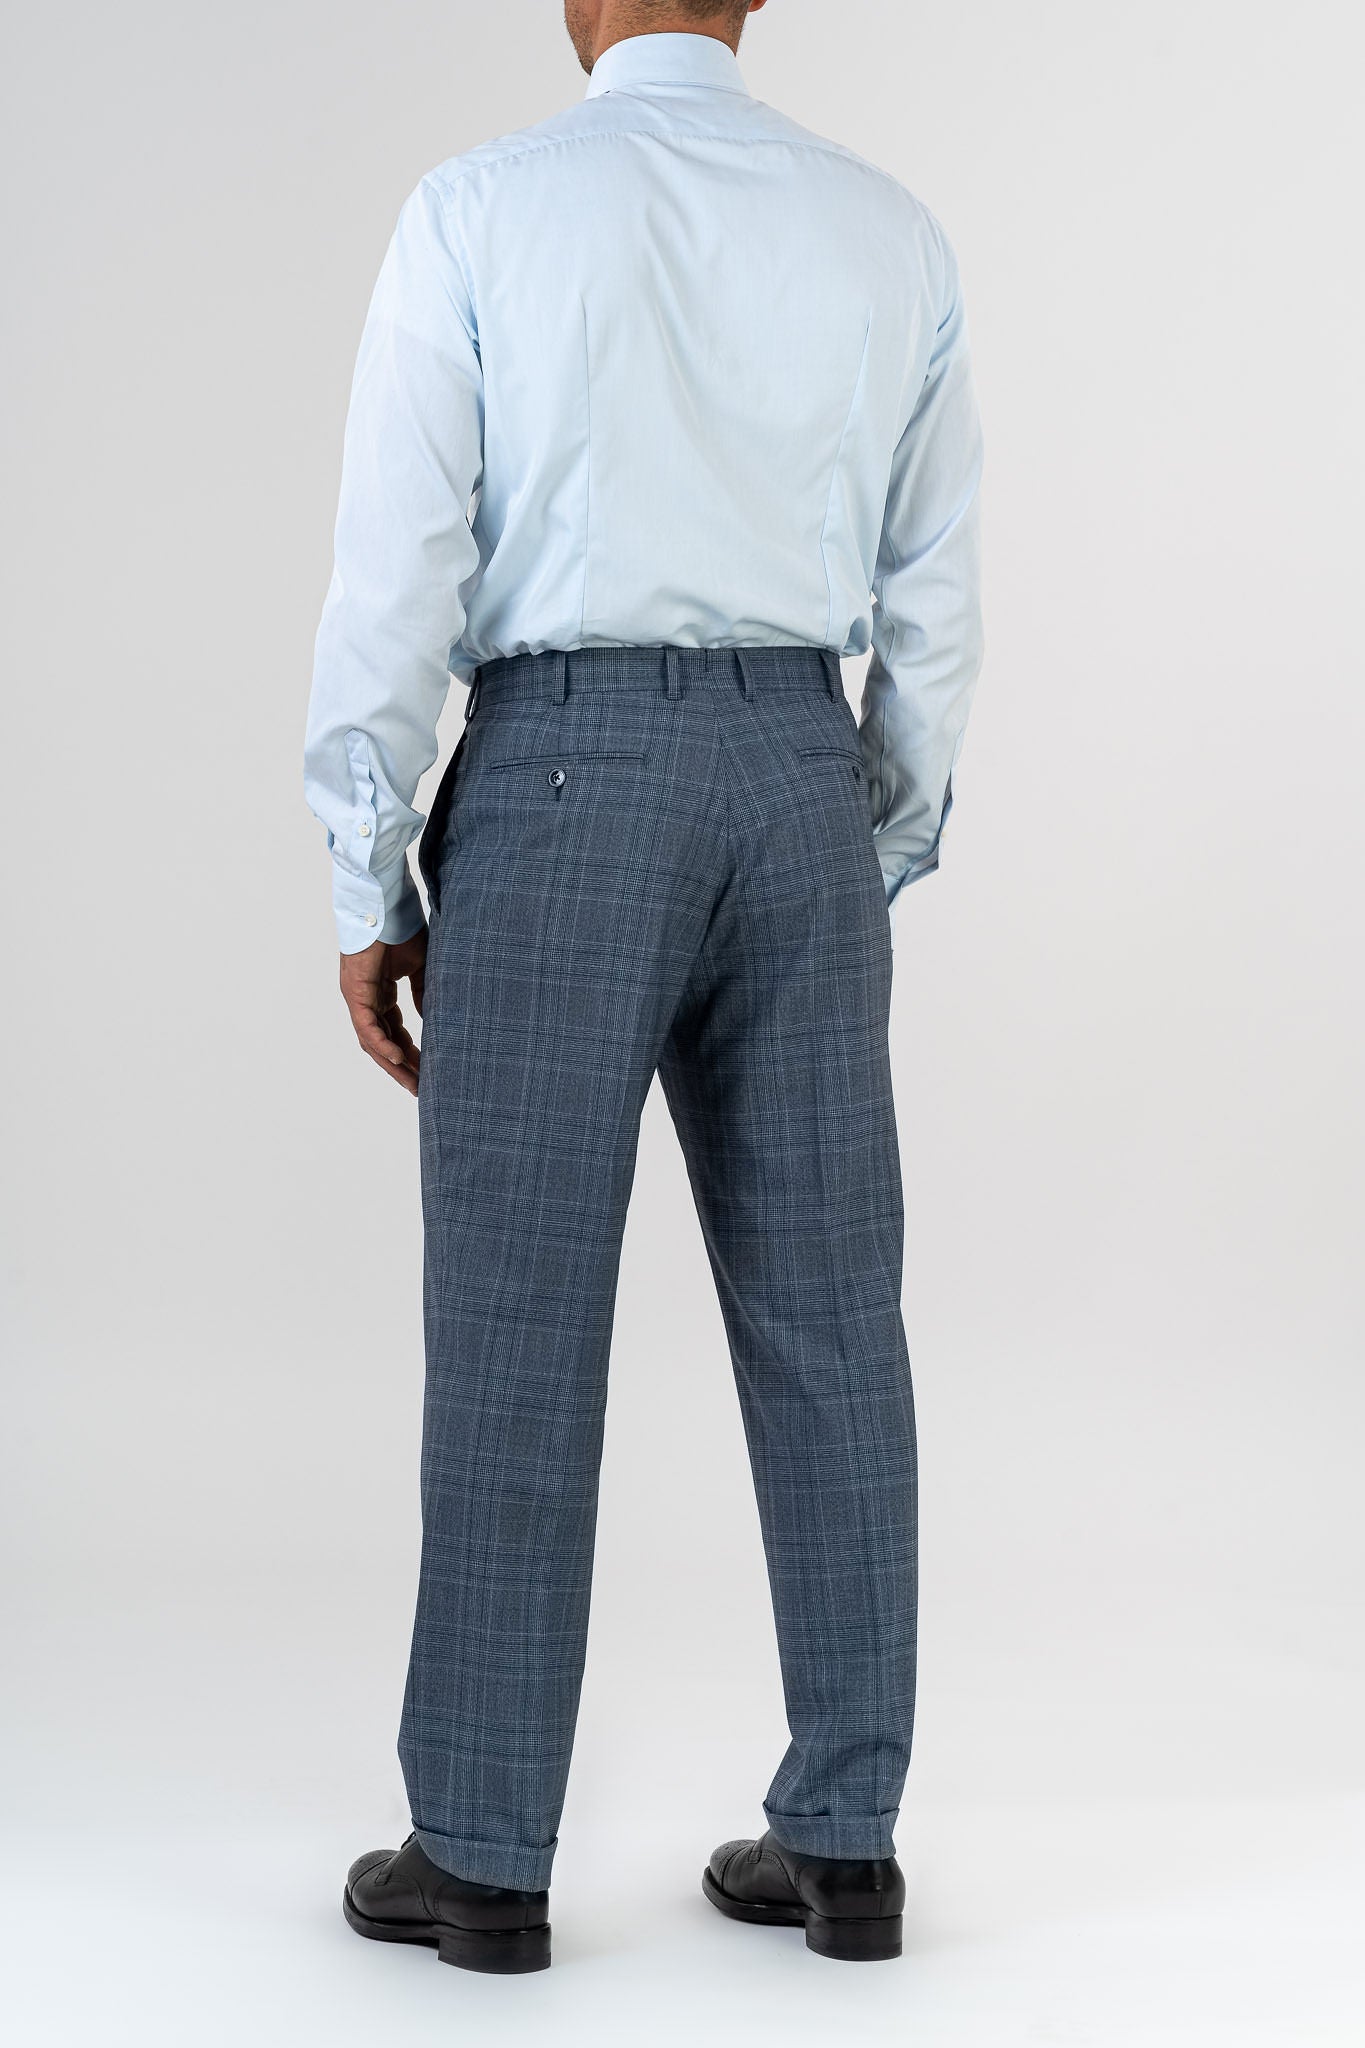 This elegant suit is made with 100% pure merino wool “Super 170s WISH” by Loro Piana. It is characterized by a checked design in shades of gray and light blue. This is a two-piece with two-button jacket with 3 pockets with flaps. One of these pockets is a watch pocket. The pants has regular rise and no darts, with american cut pockets and two back pockets. Belt with loops and zip on the front. -  Sartoria dei Duchi.